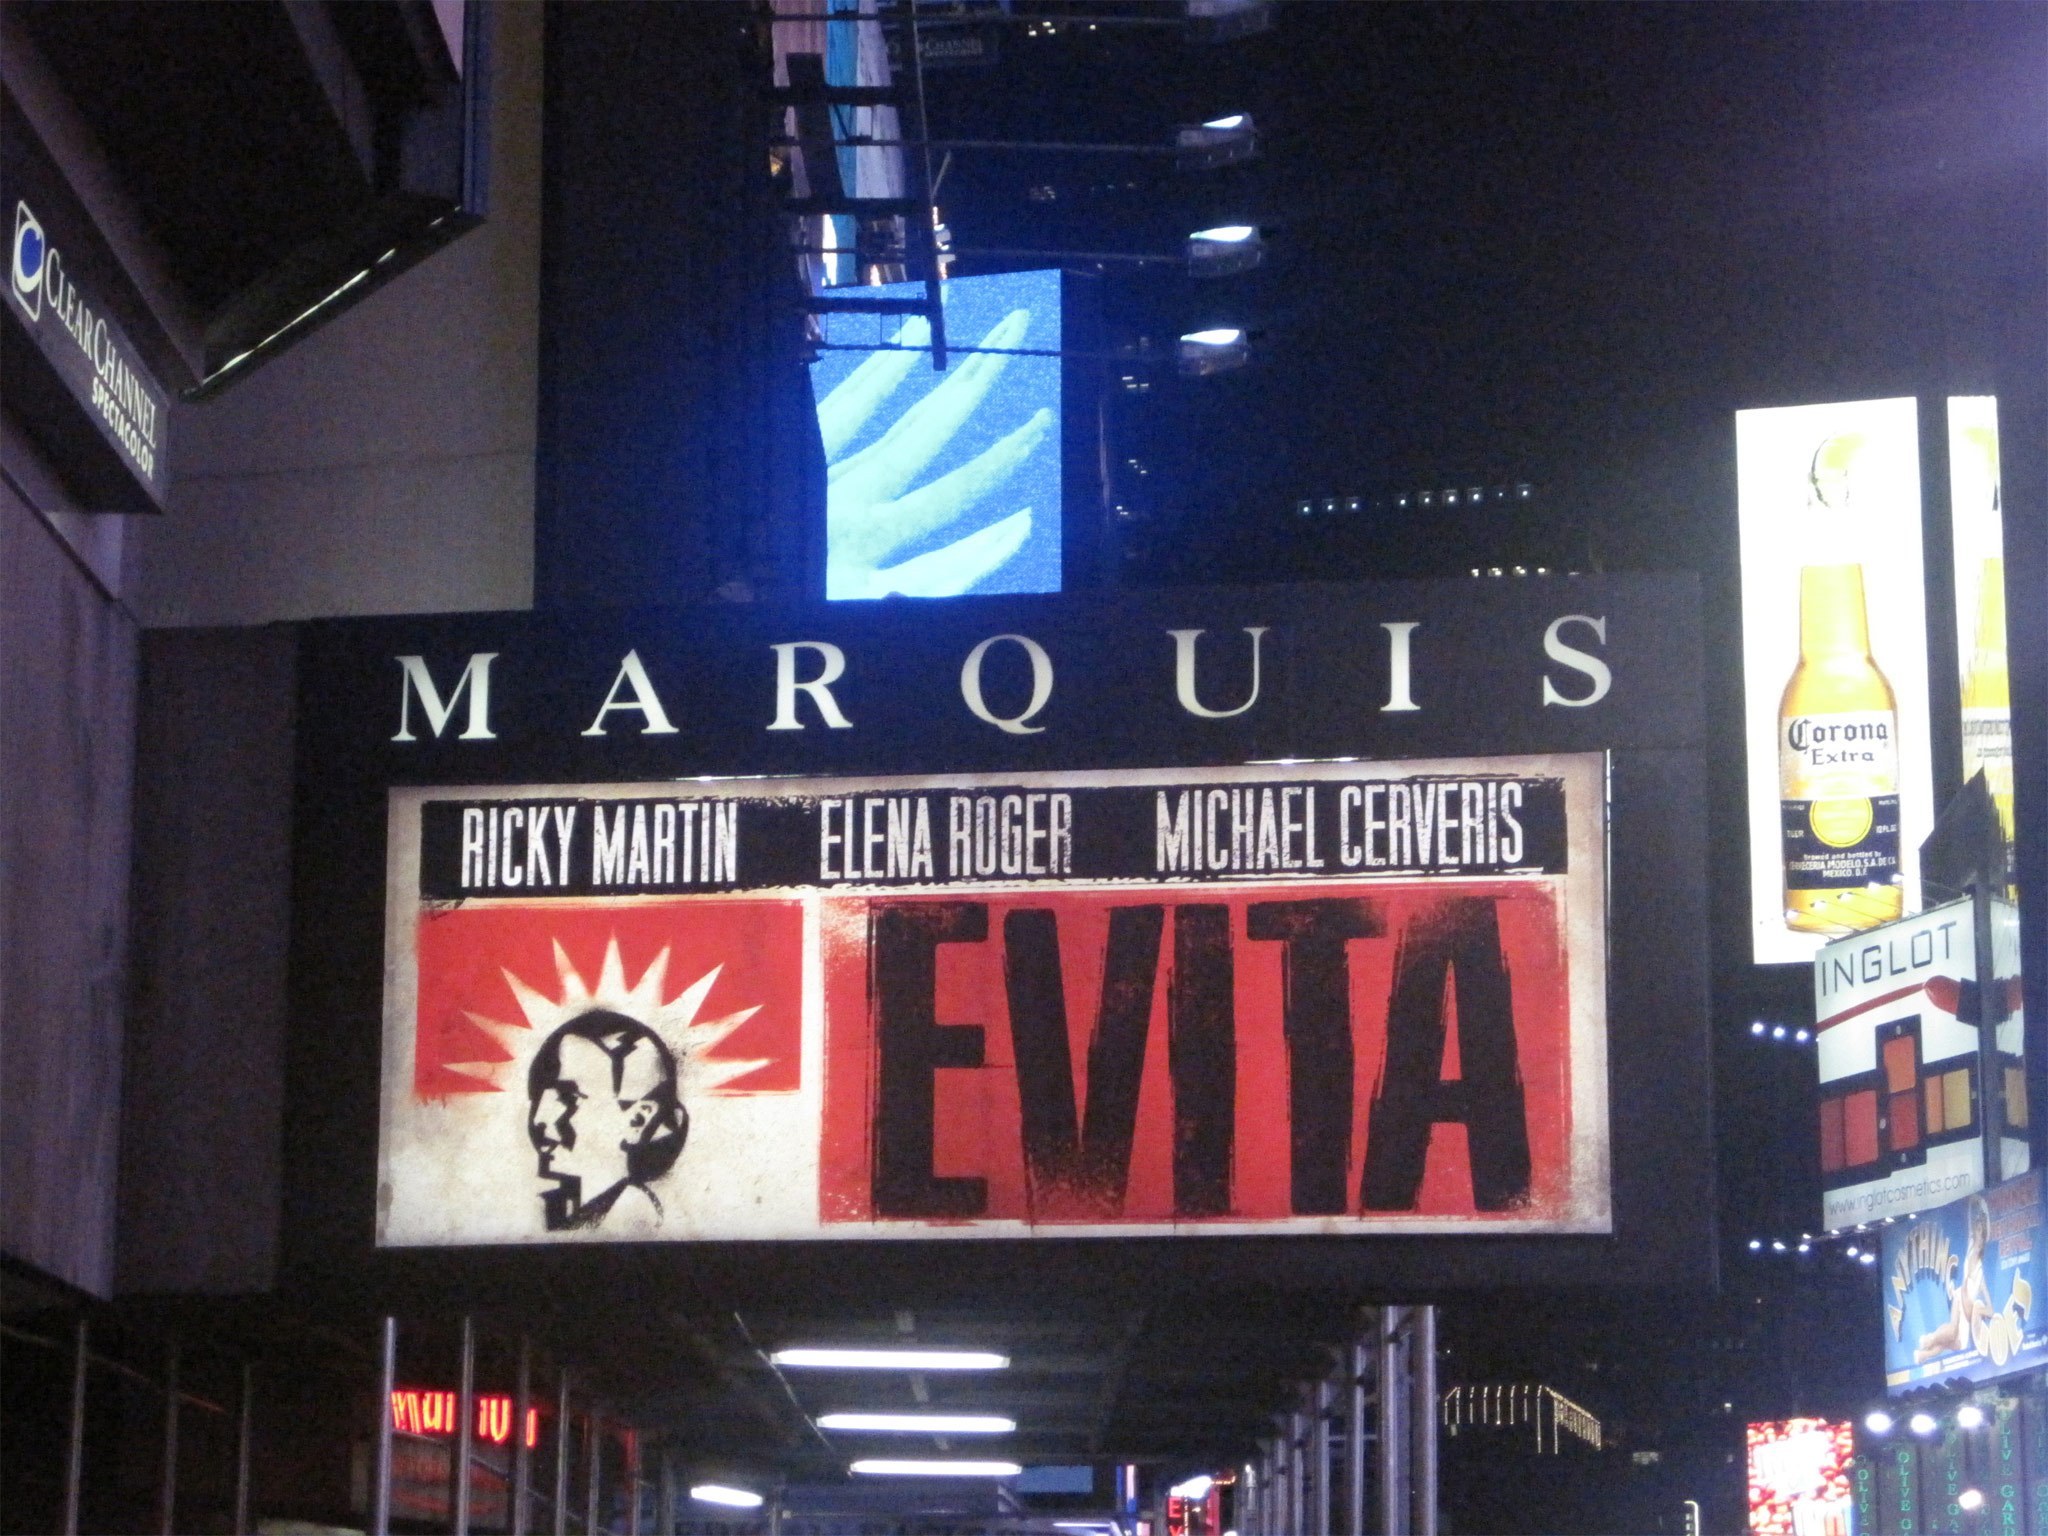 Evita marquee at the Marquis Theatre in NYC